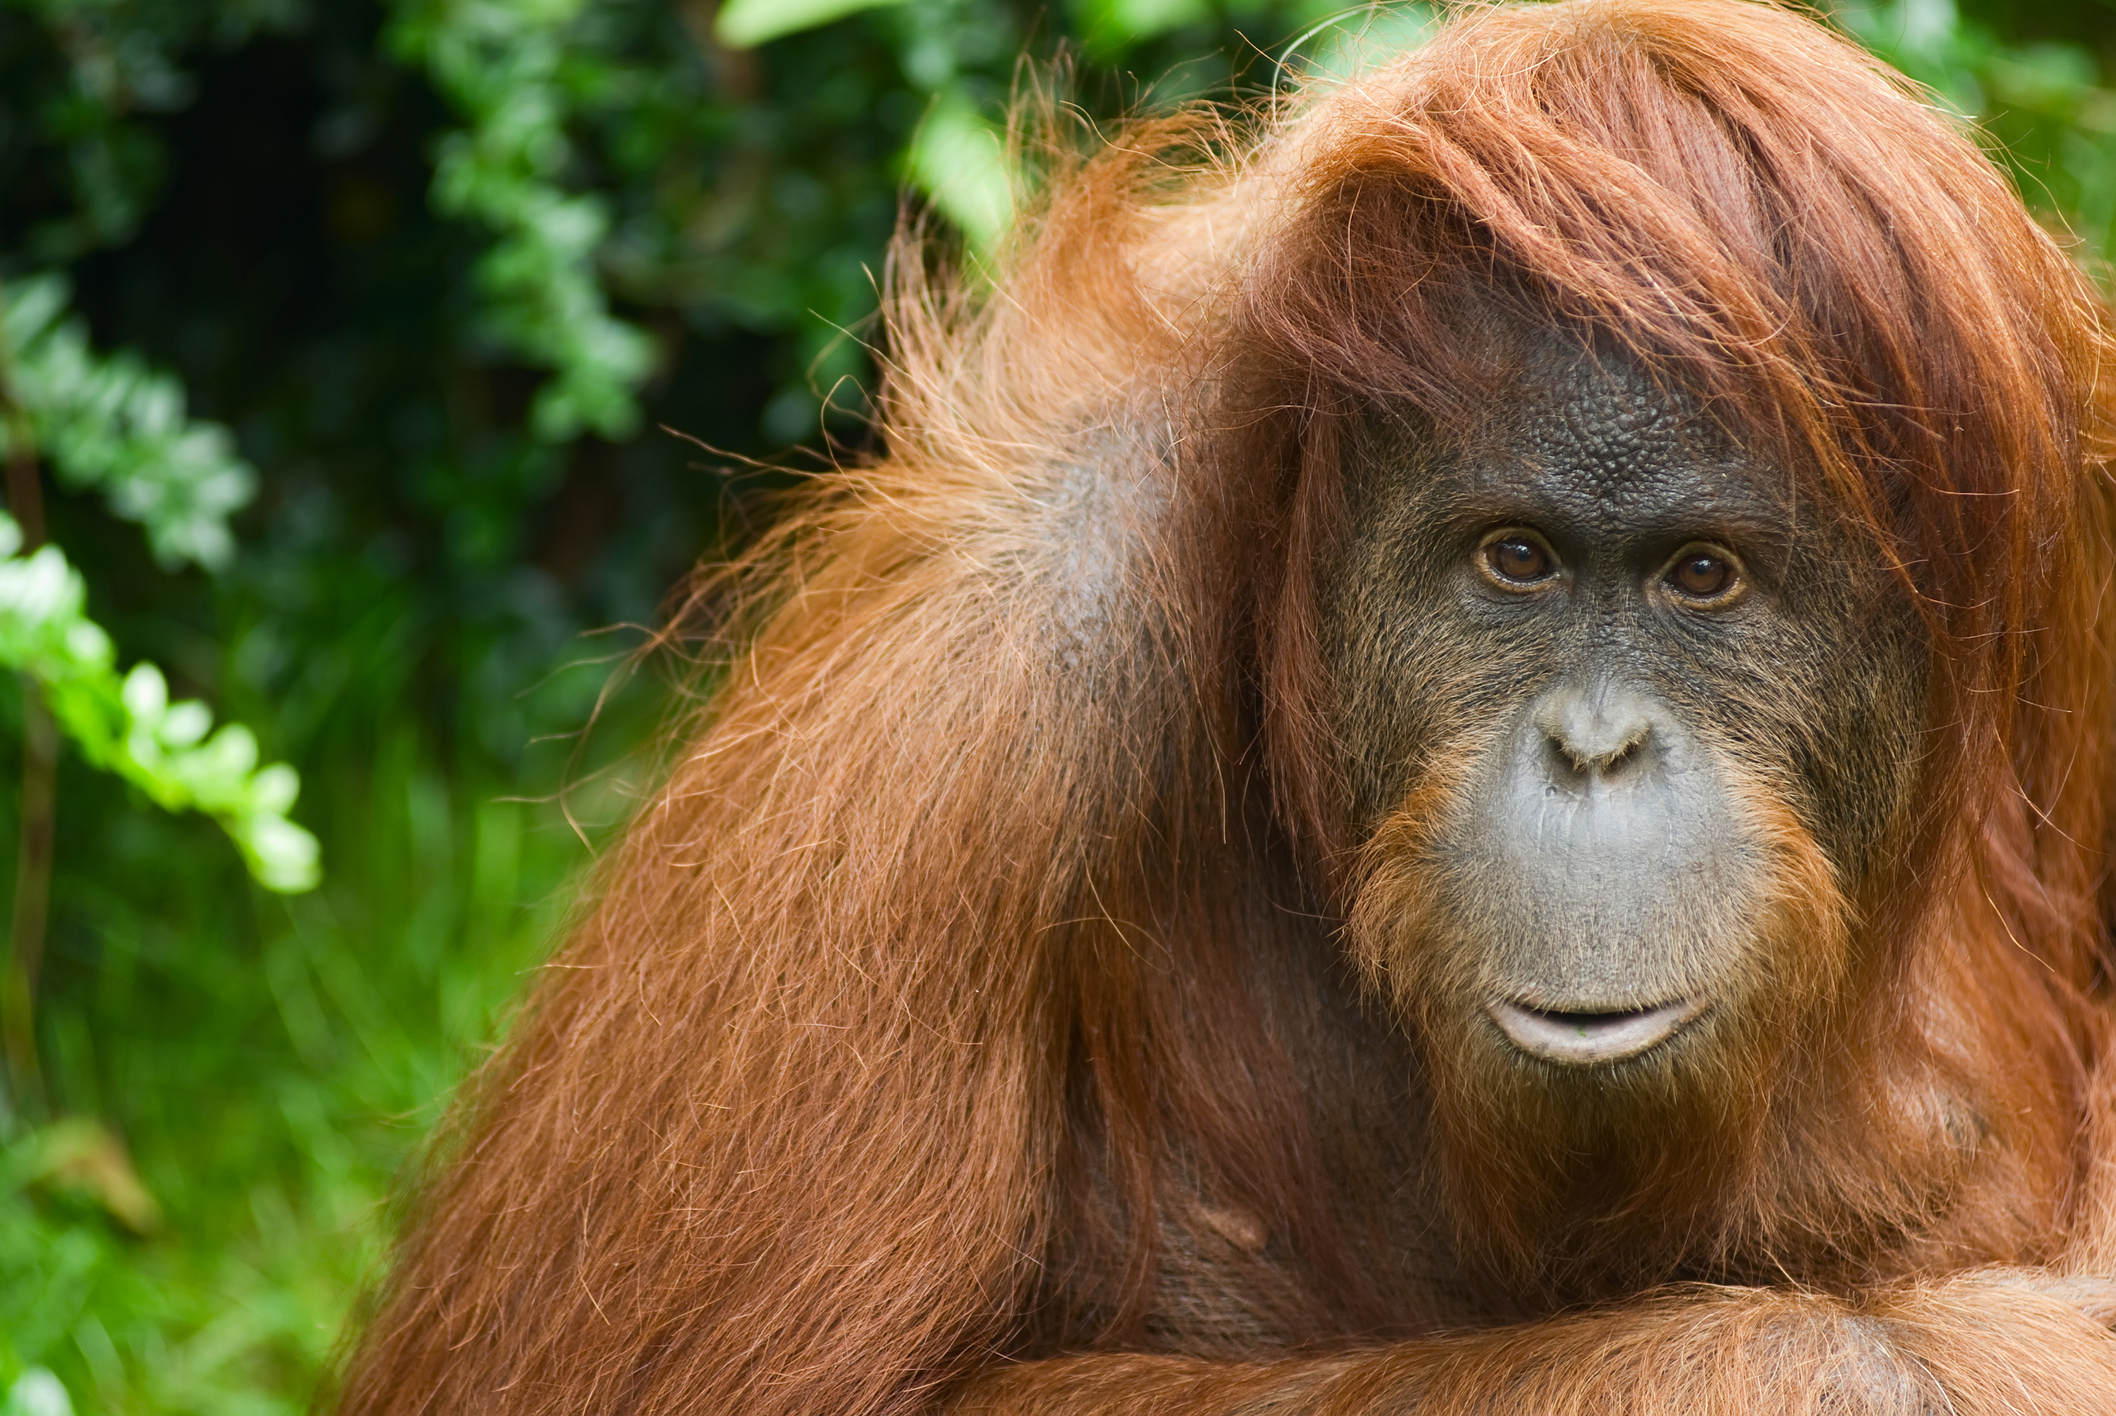 Orangutan Blinded After Being Shot in the Head 16 Times by Air Rifle in